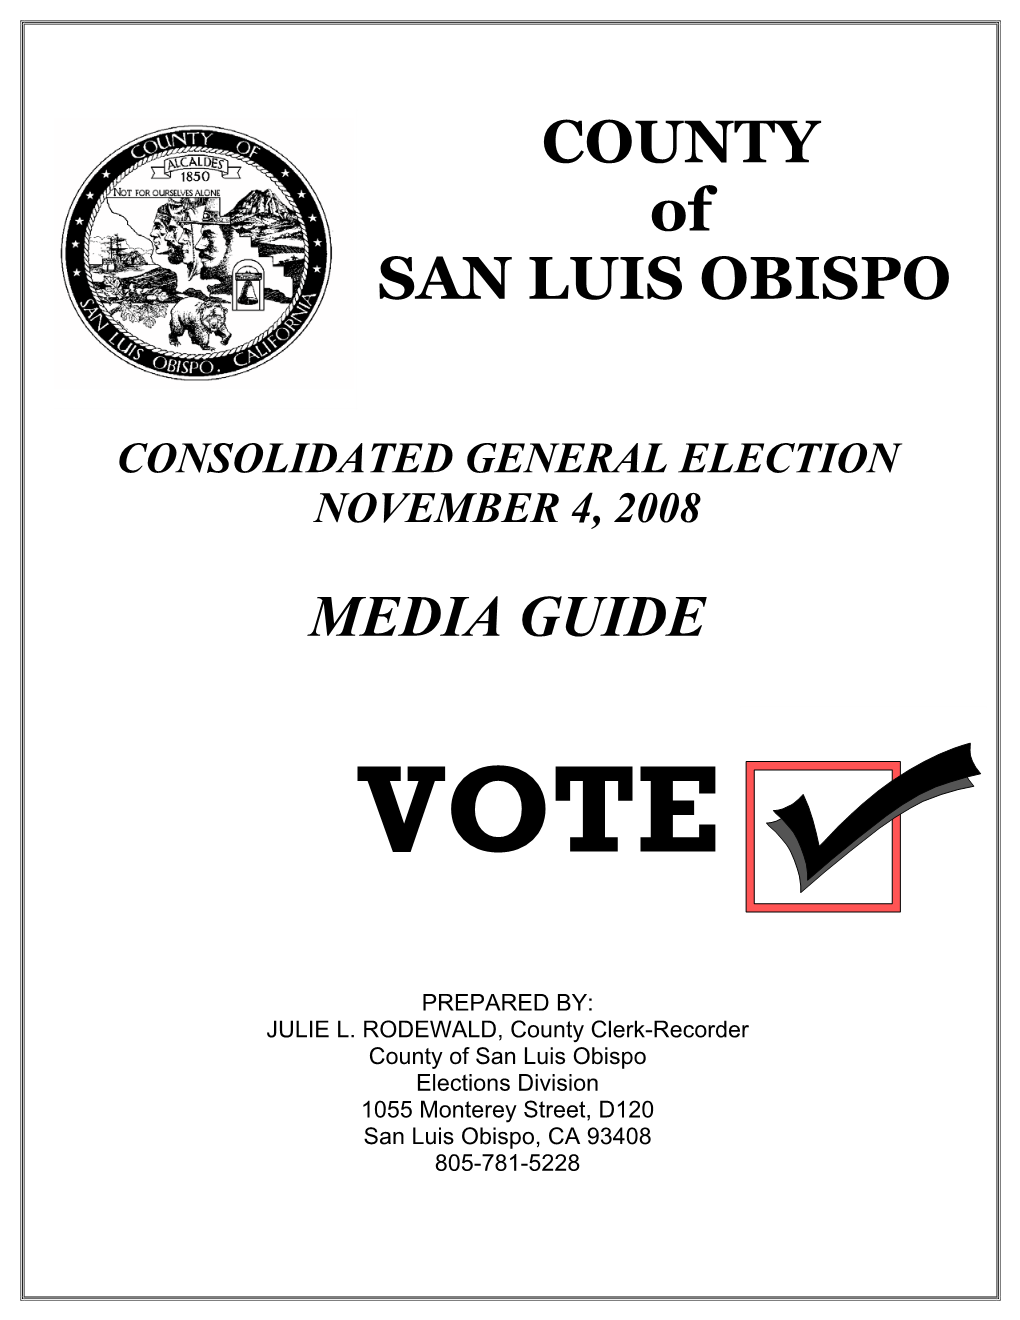 Consolidated General Election November 4, 2008